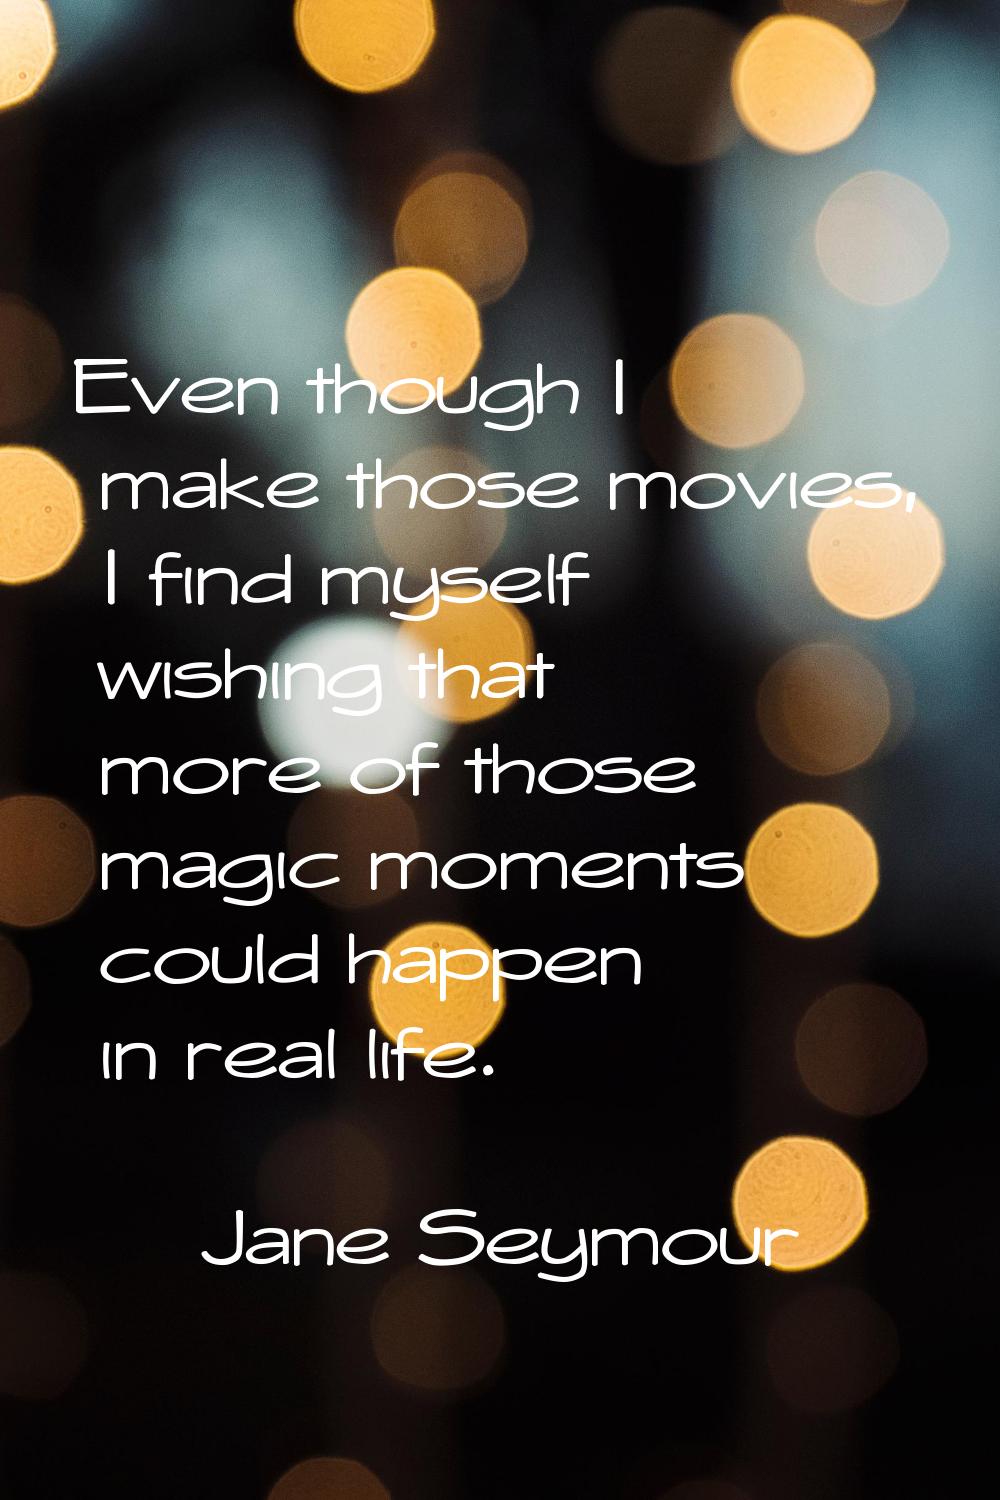 Even though I make those movies, I find myself wishing that more of those magic moments could happe